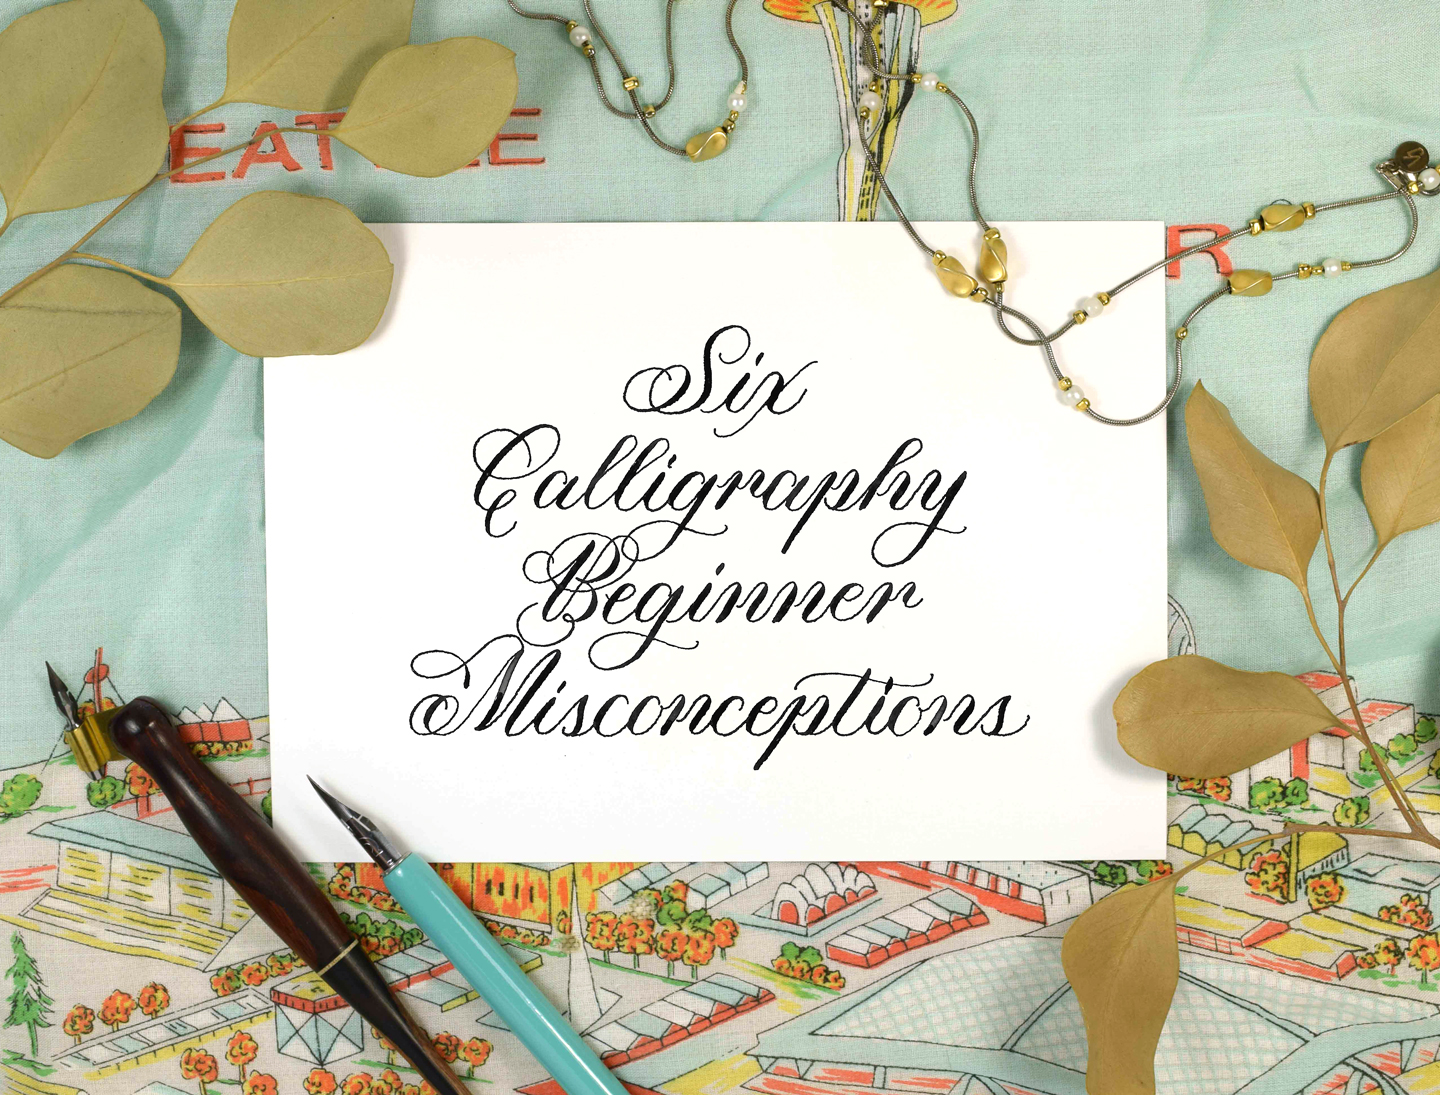 Six Calligraphy Beginner Misconceptions